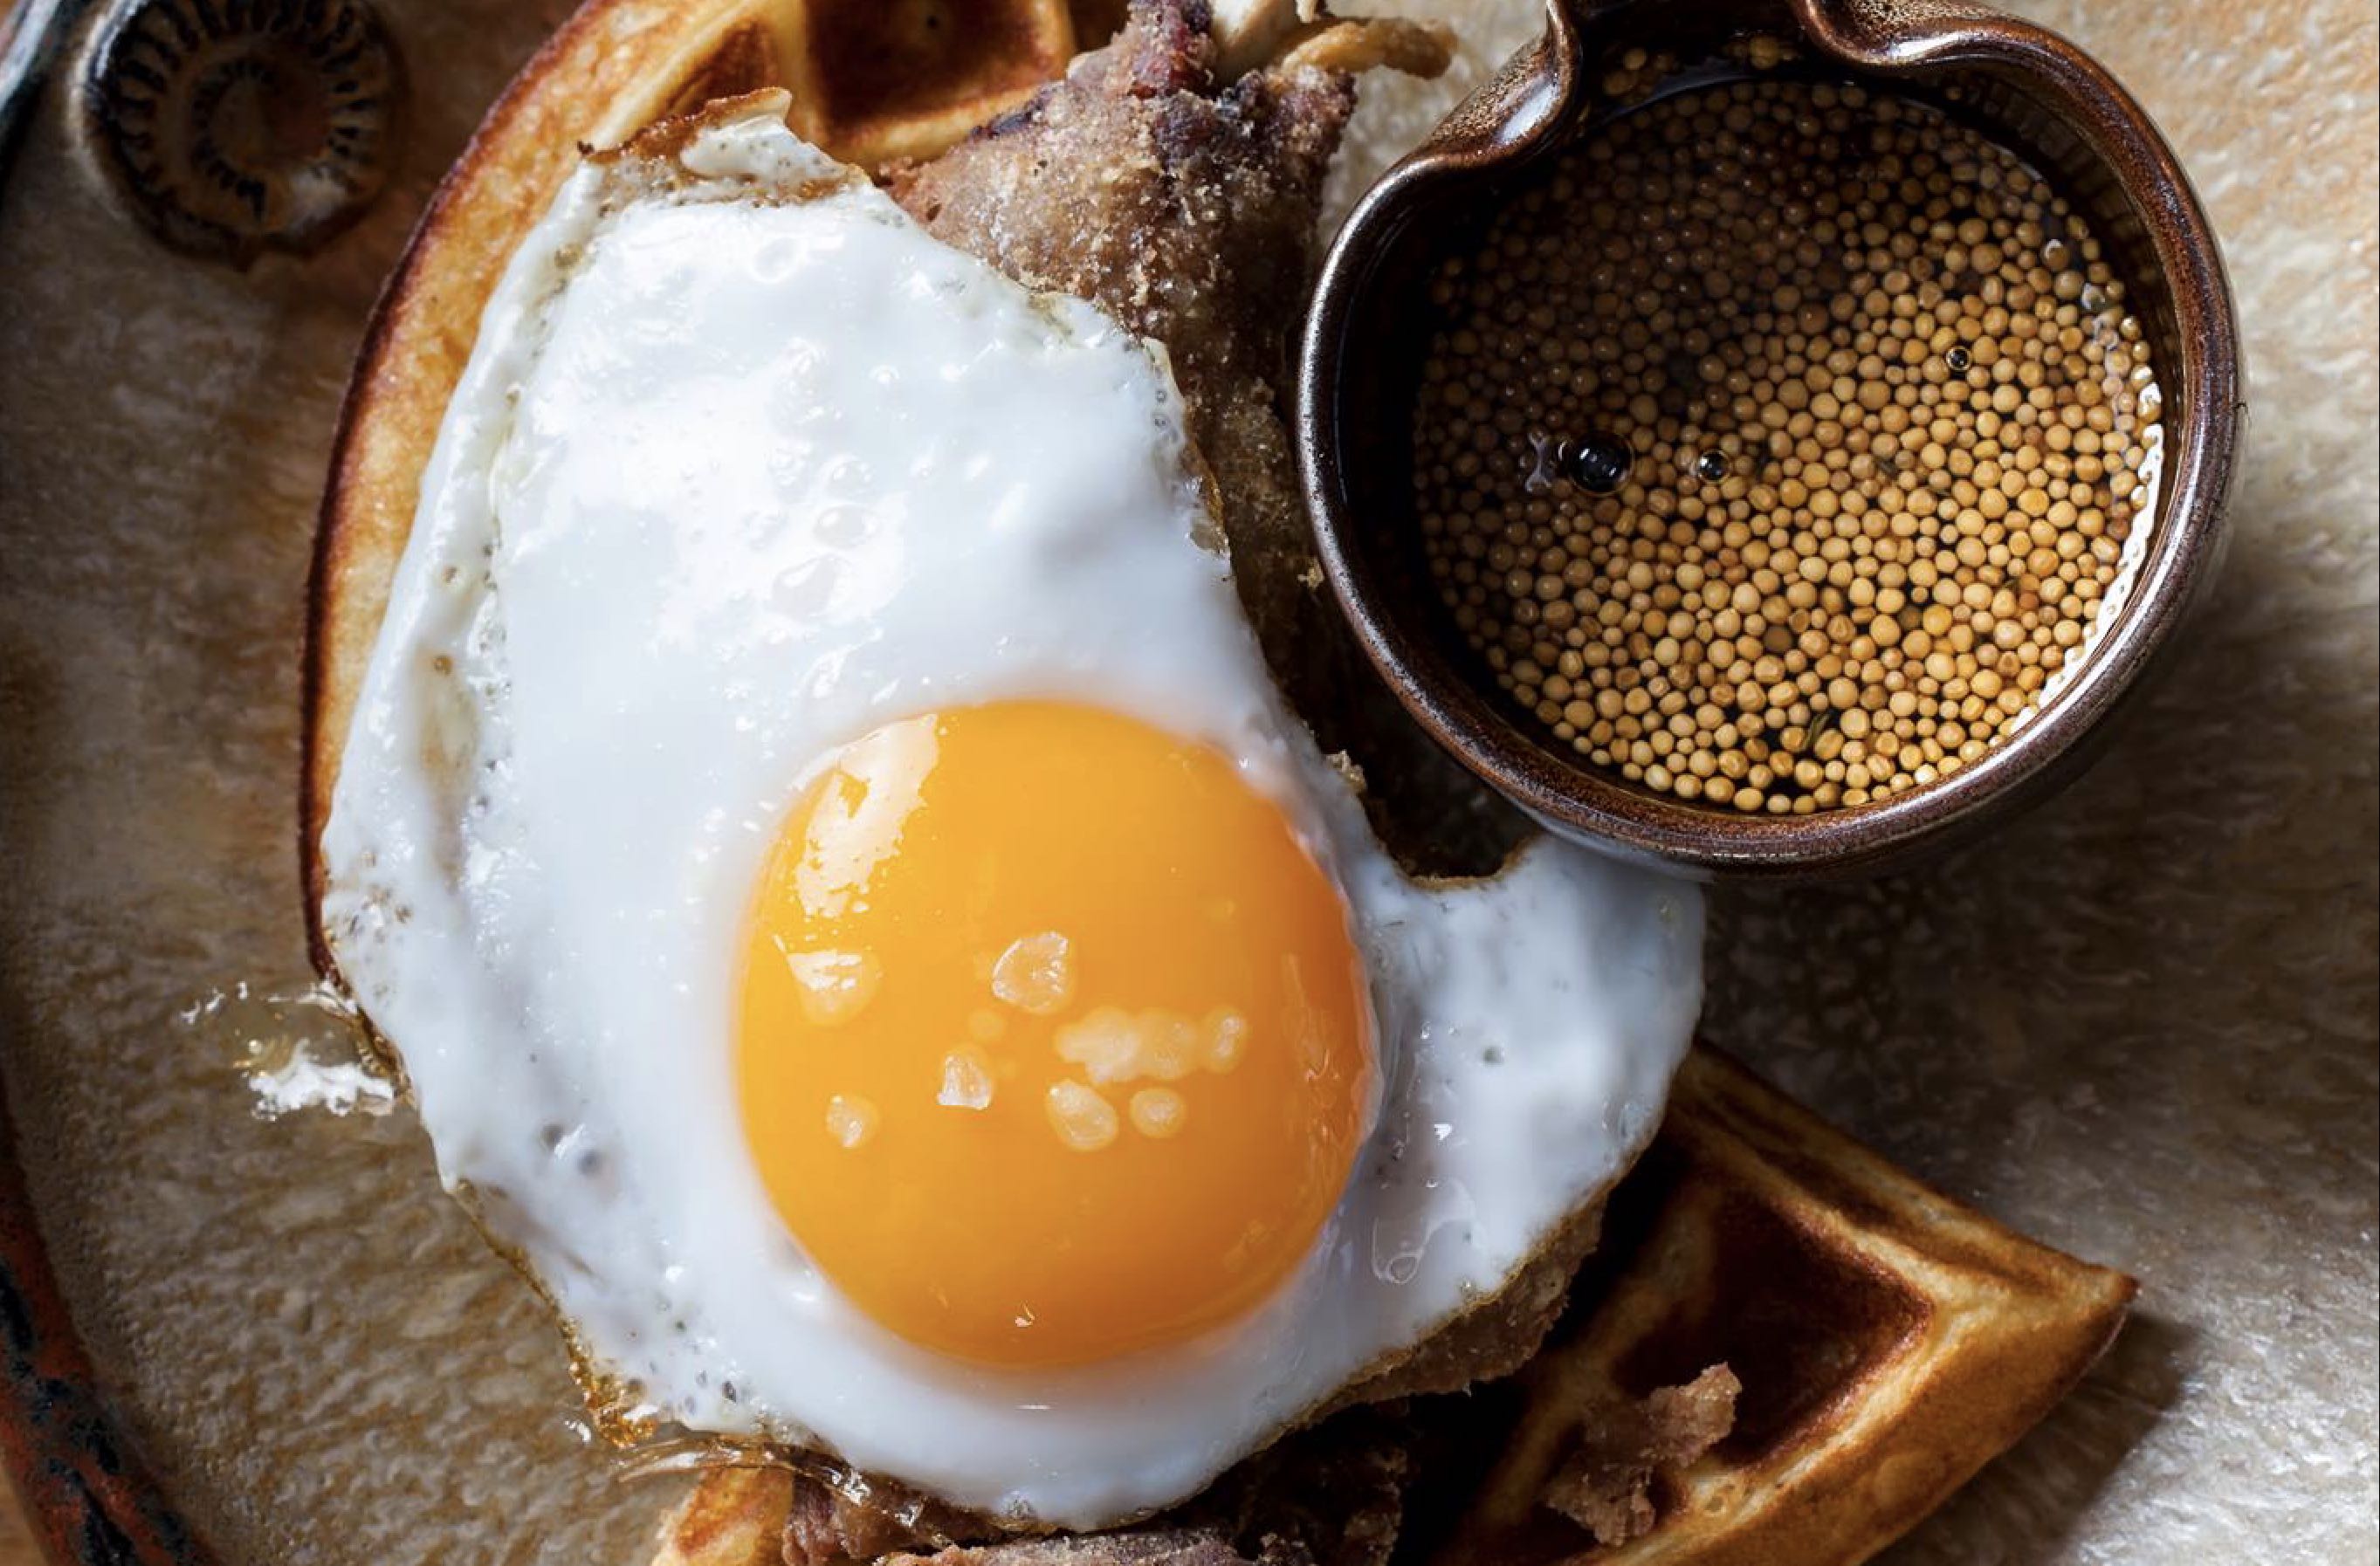 Duck and Waffle’s signature dish, a fried duck and duck egg on a waffle. The London restaurant will be opening its first international outpost in Hong Kong this fall. Photo via Facebook/Duck and Waffle.